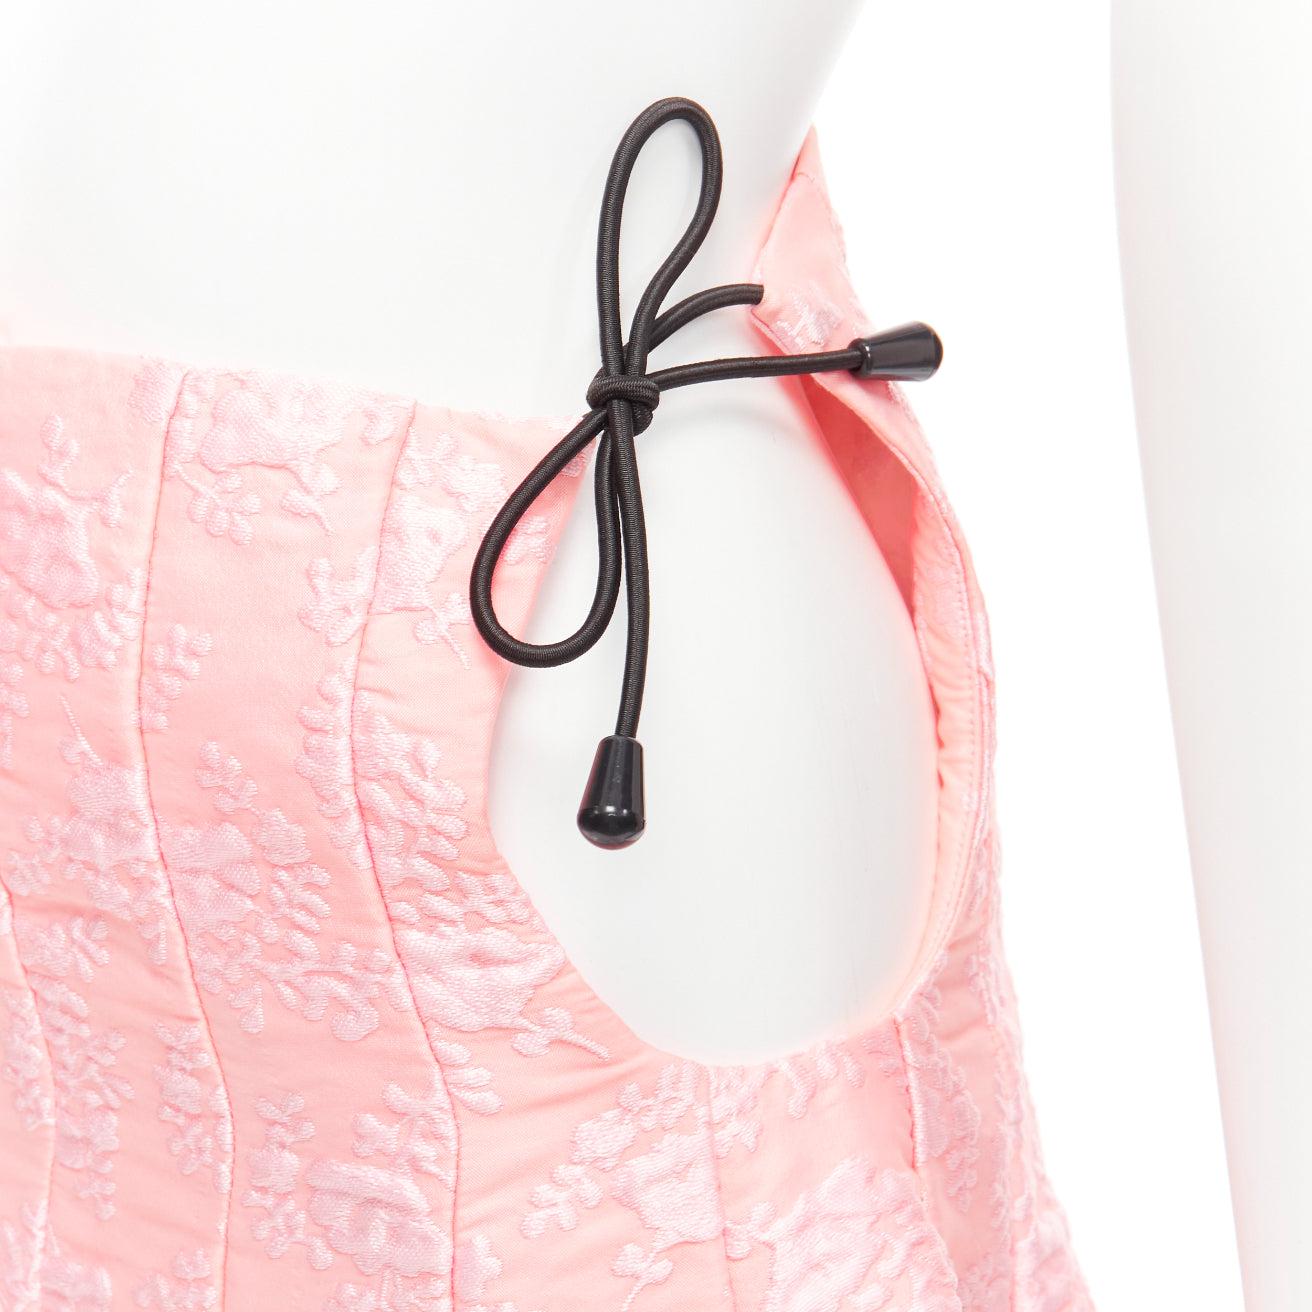 SHU SHU TONG light pink cloque bungee cord cut out waist flared skirt UK6 XS
Reference: AAWC/A00591
Brand: Shushu Tong
Collection: 2021 AW
Material: Polyester, Nylon
Color: Pink
Pattern: Floral
Closure: Zip
Lining: Pink Polyester
Extra Details: Cord